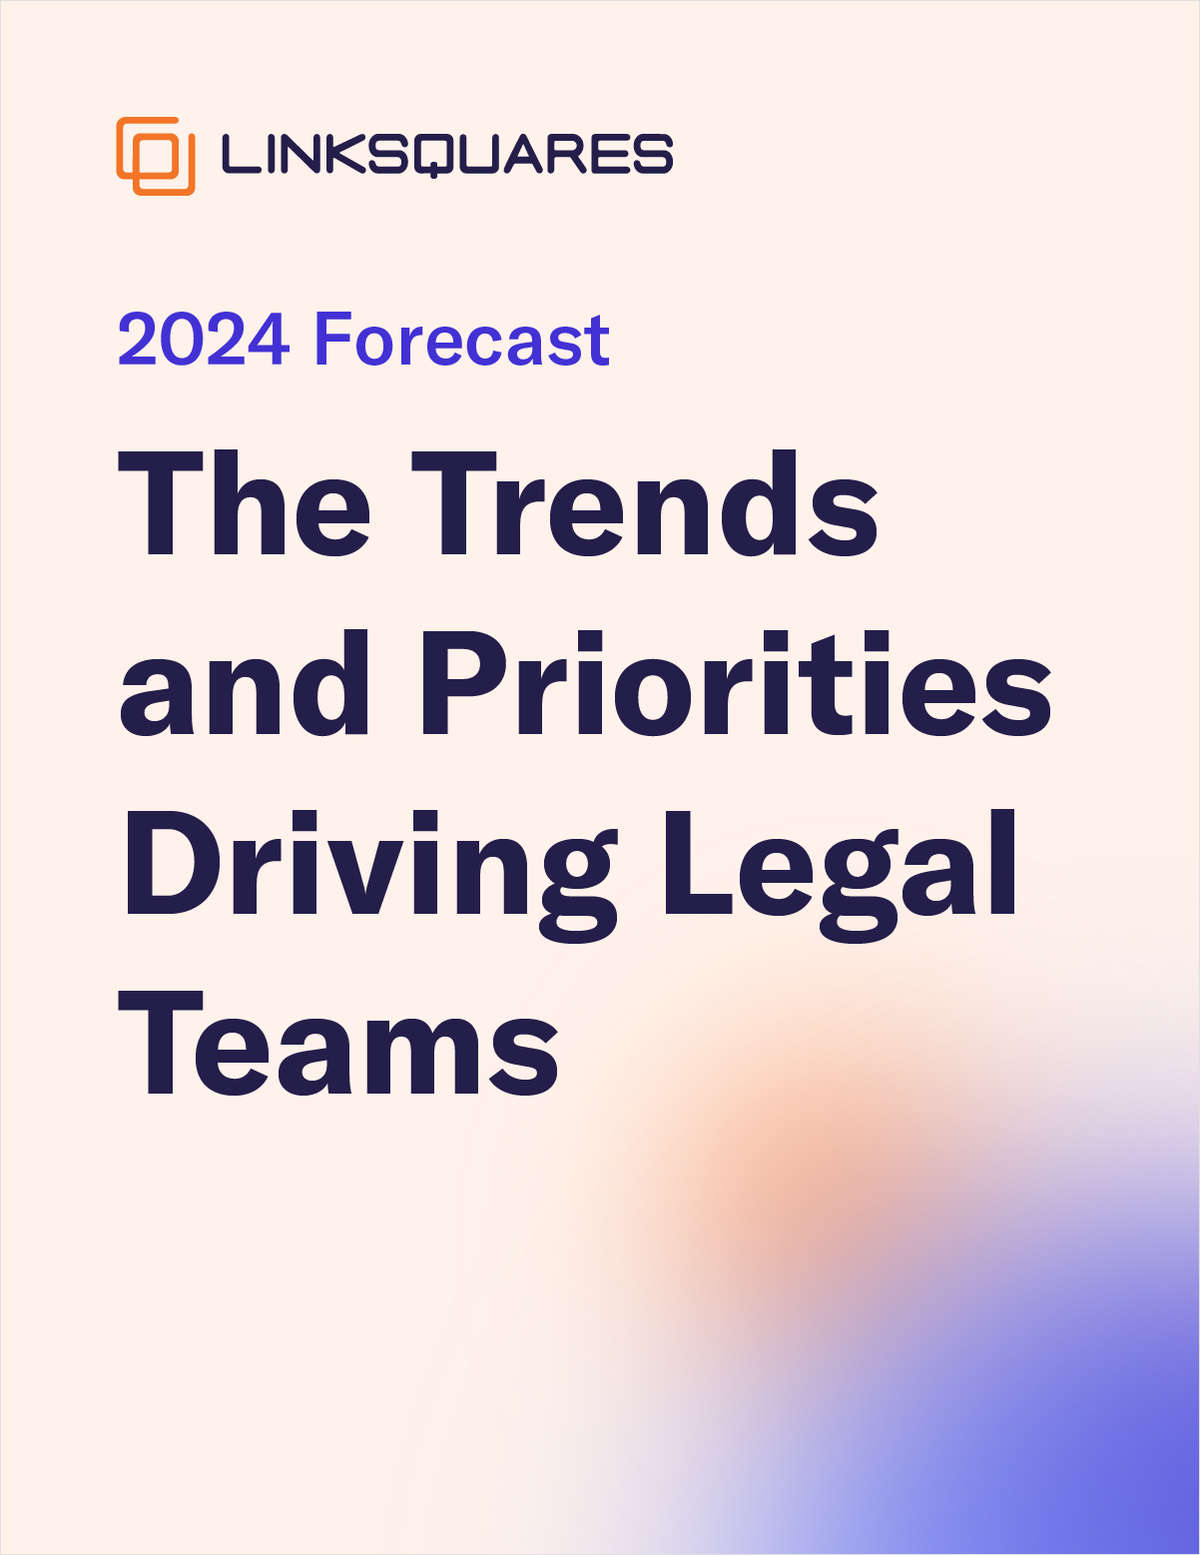 This white paper offers a valuable resource for legal professionals to gain insights into the trends, challenges and priorities shaping the legal landscape in 2024. It provides practical recommendations, such as leveraging legal technology and embracing AI, to help legal teams adapt and thrive in a rapidly changing environment.